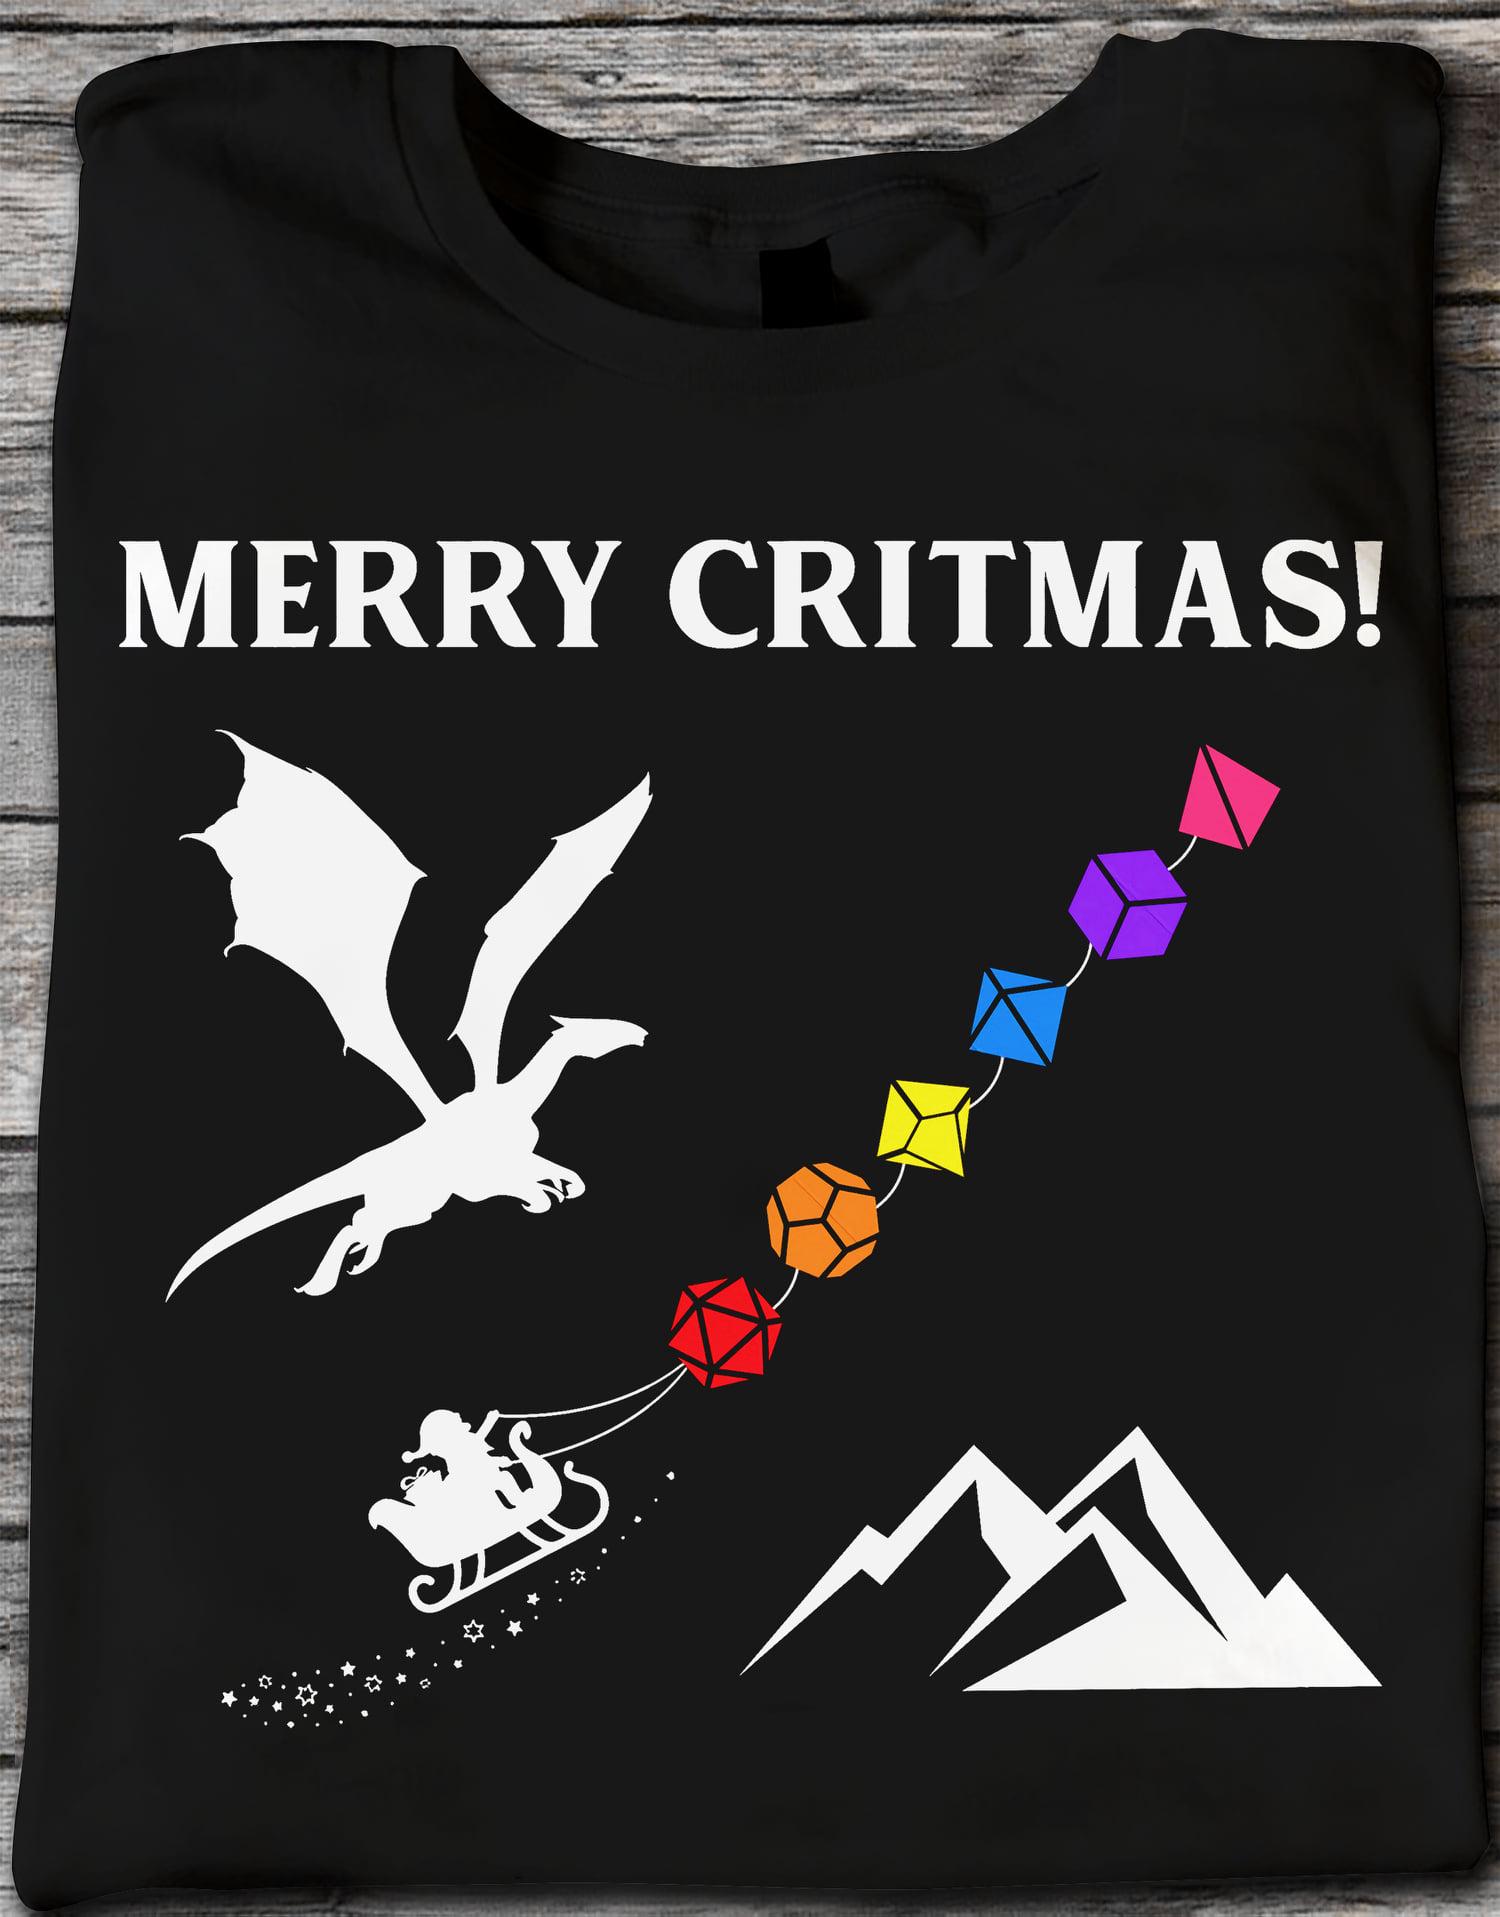 Merry Critmas - Dungeons and Dragons, Christmas day gift